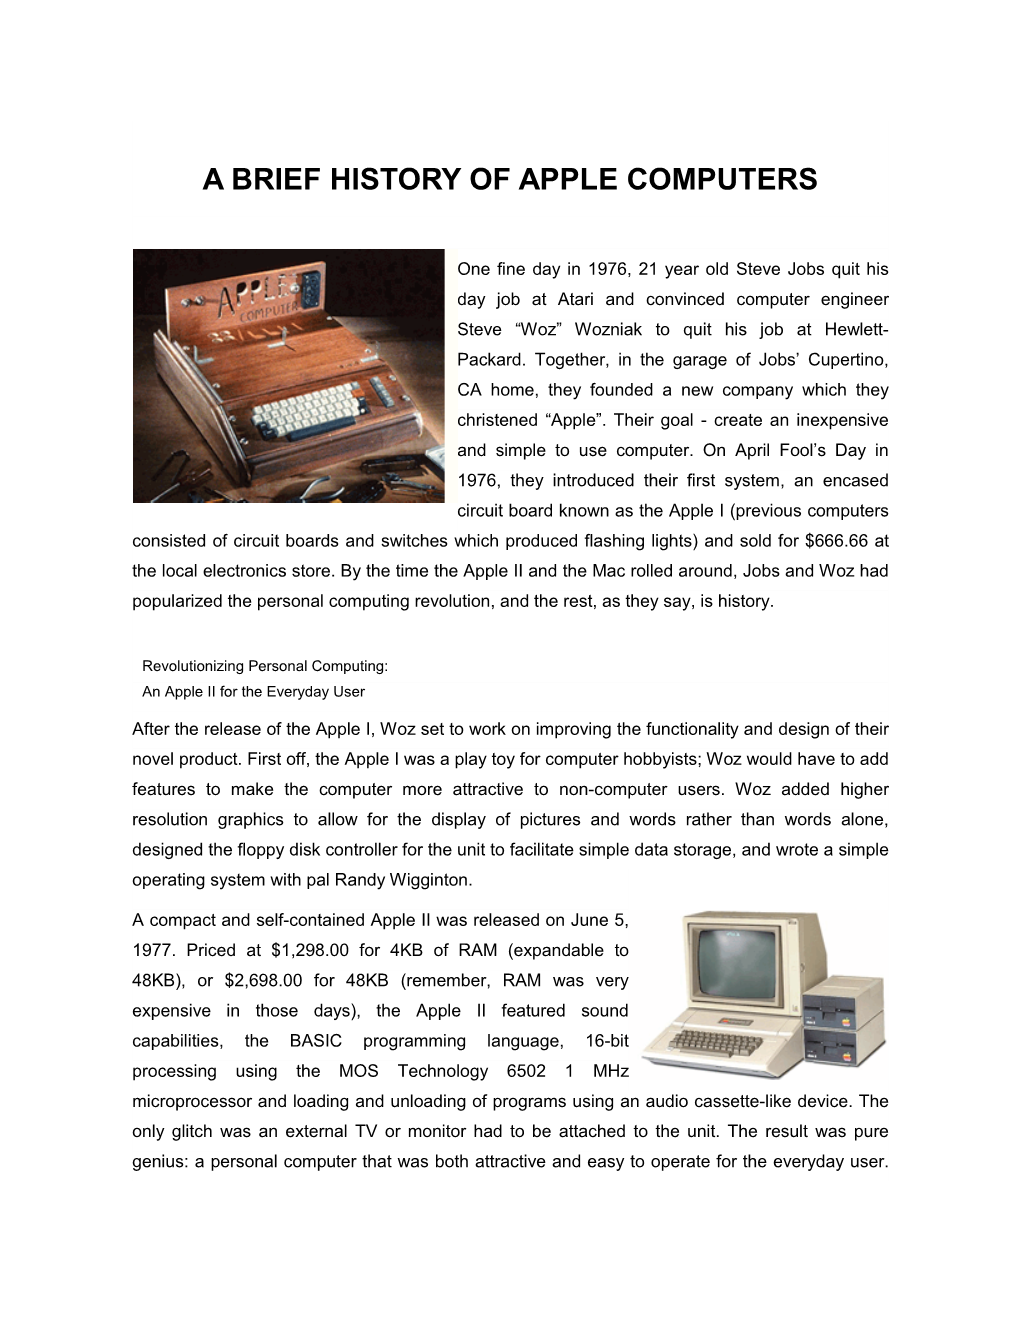 A Brief History of Apple Computers